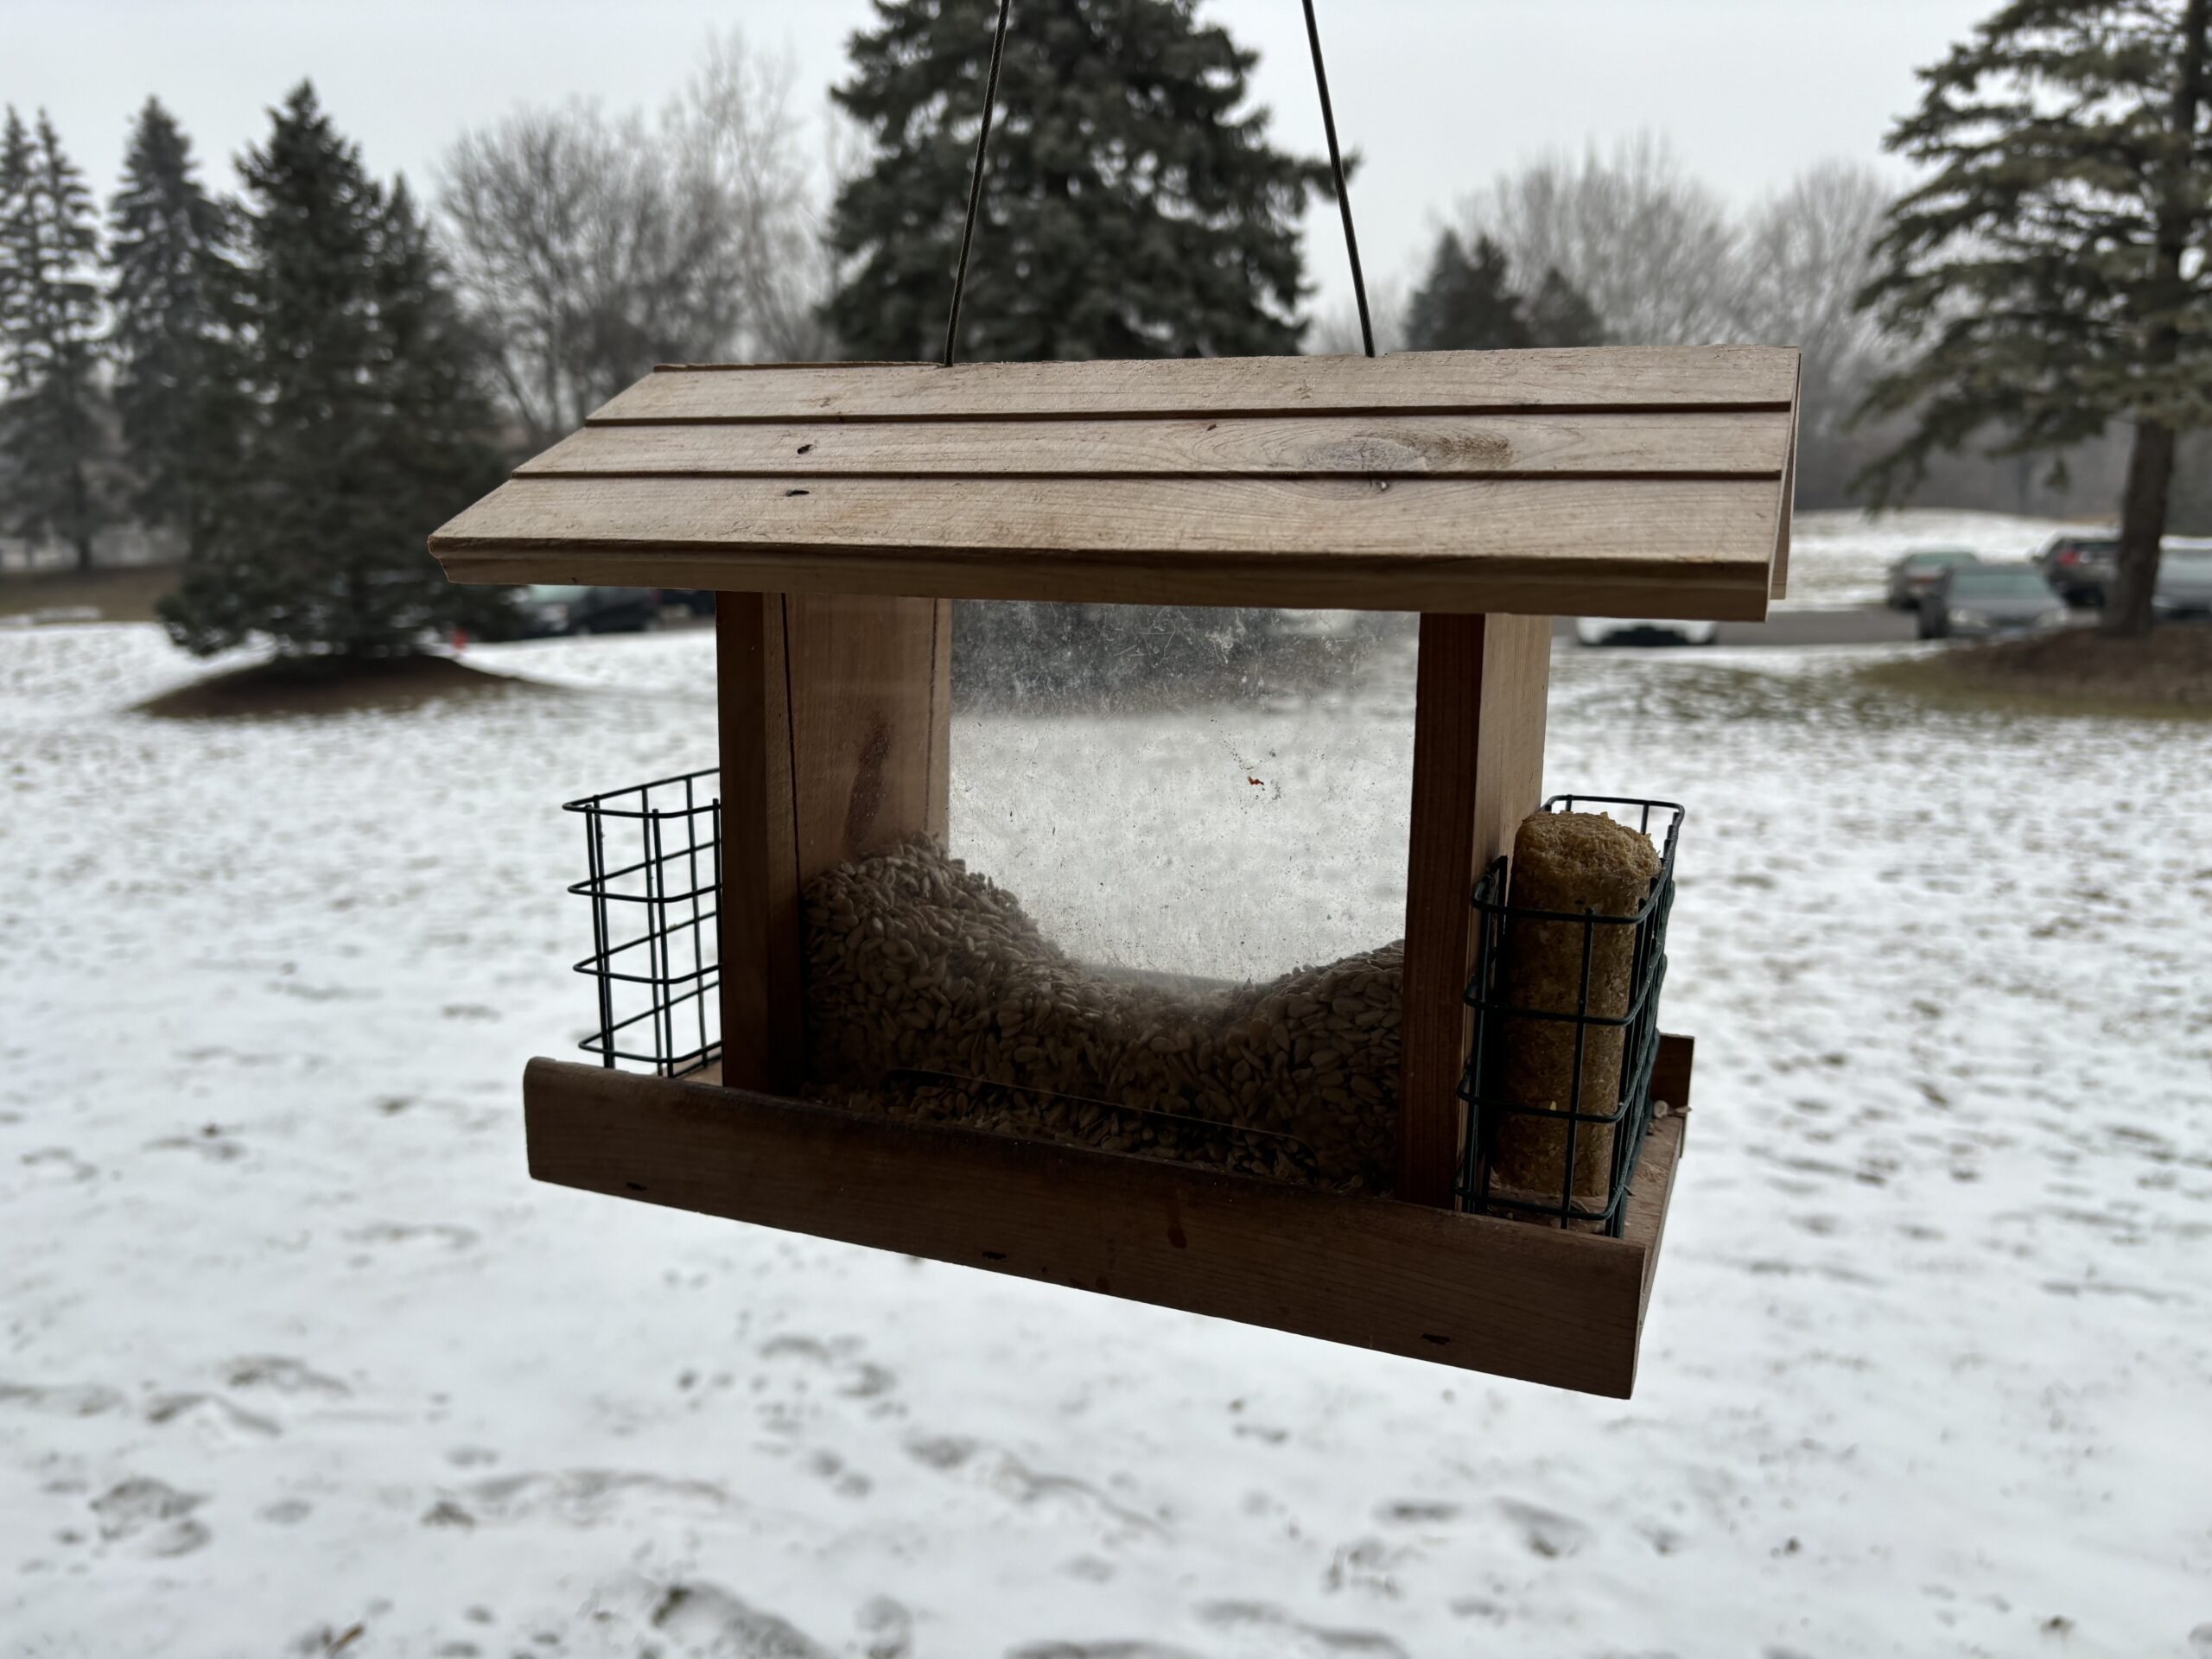 Review: A Bird Feeder Cardinals and Woodpeckers Love